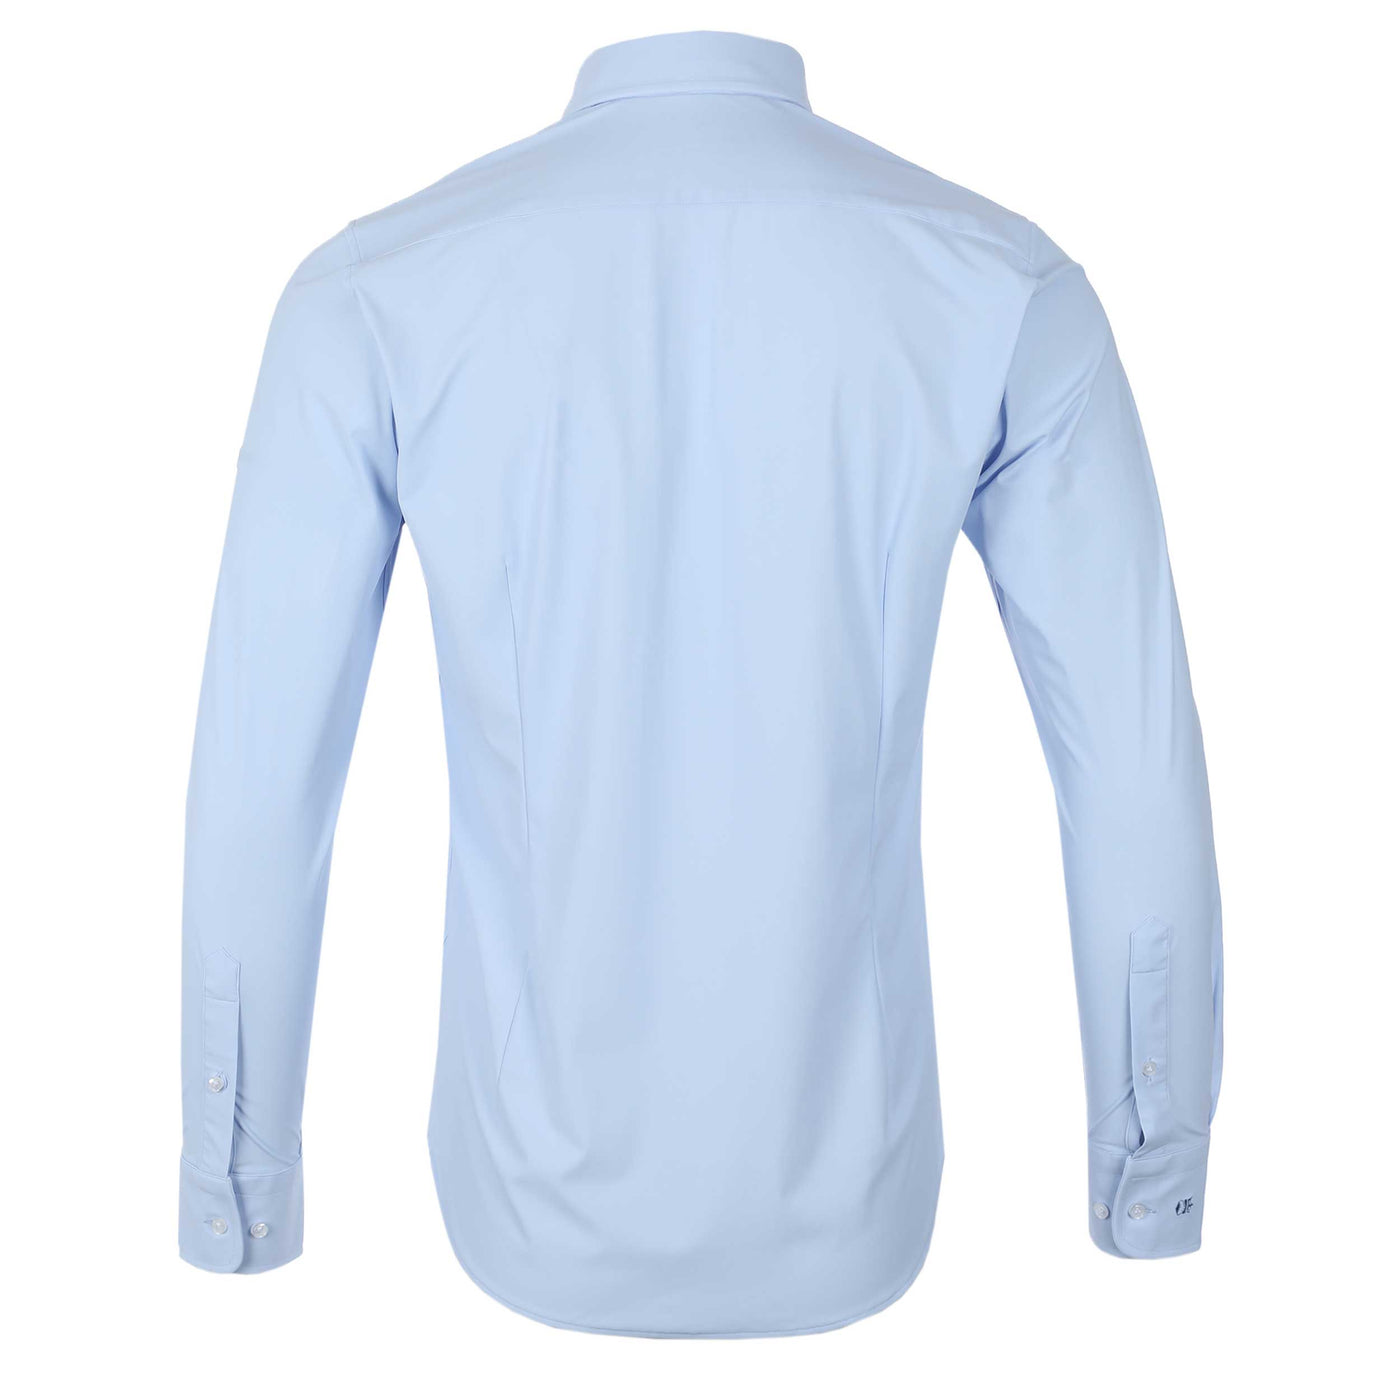 Thomas Maine Tech Luxe Stretch Shirt in Sky Blue Back